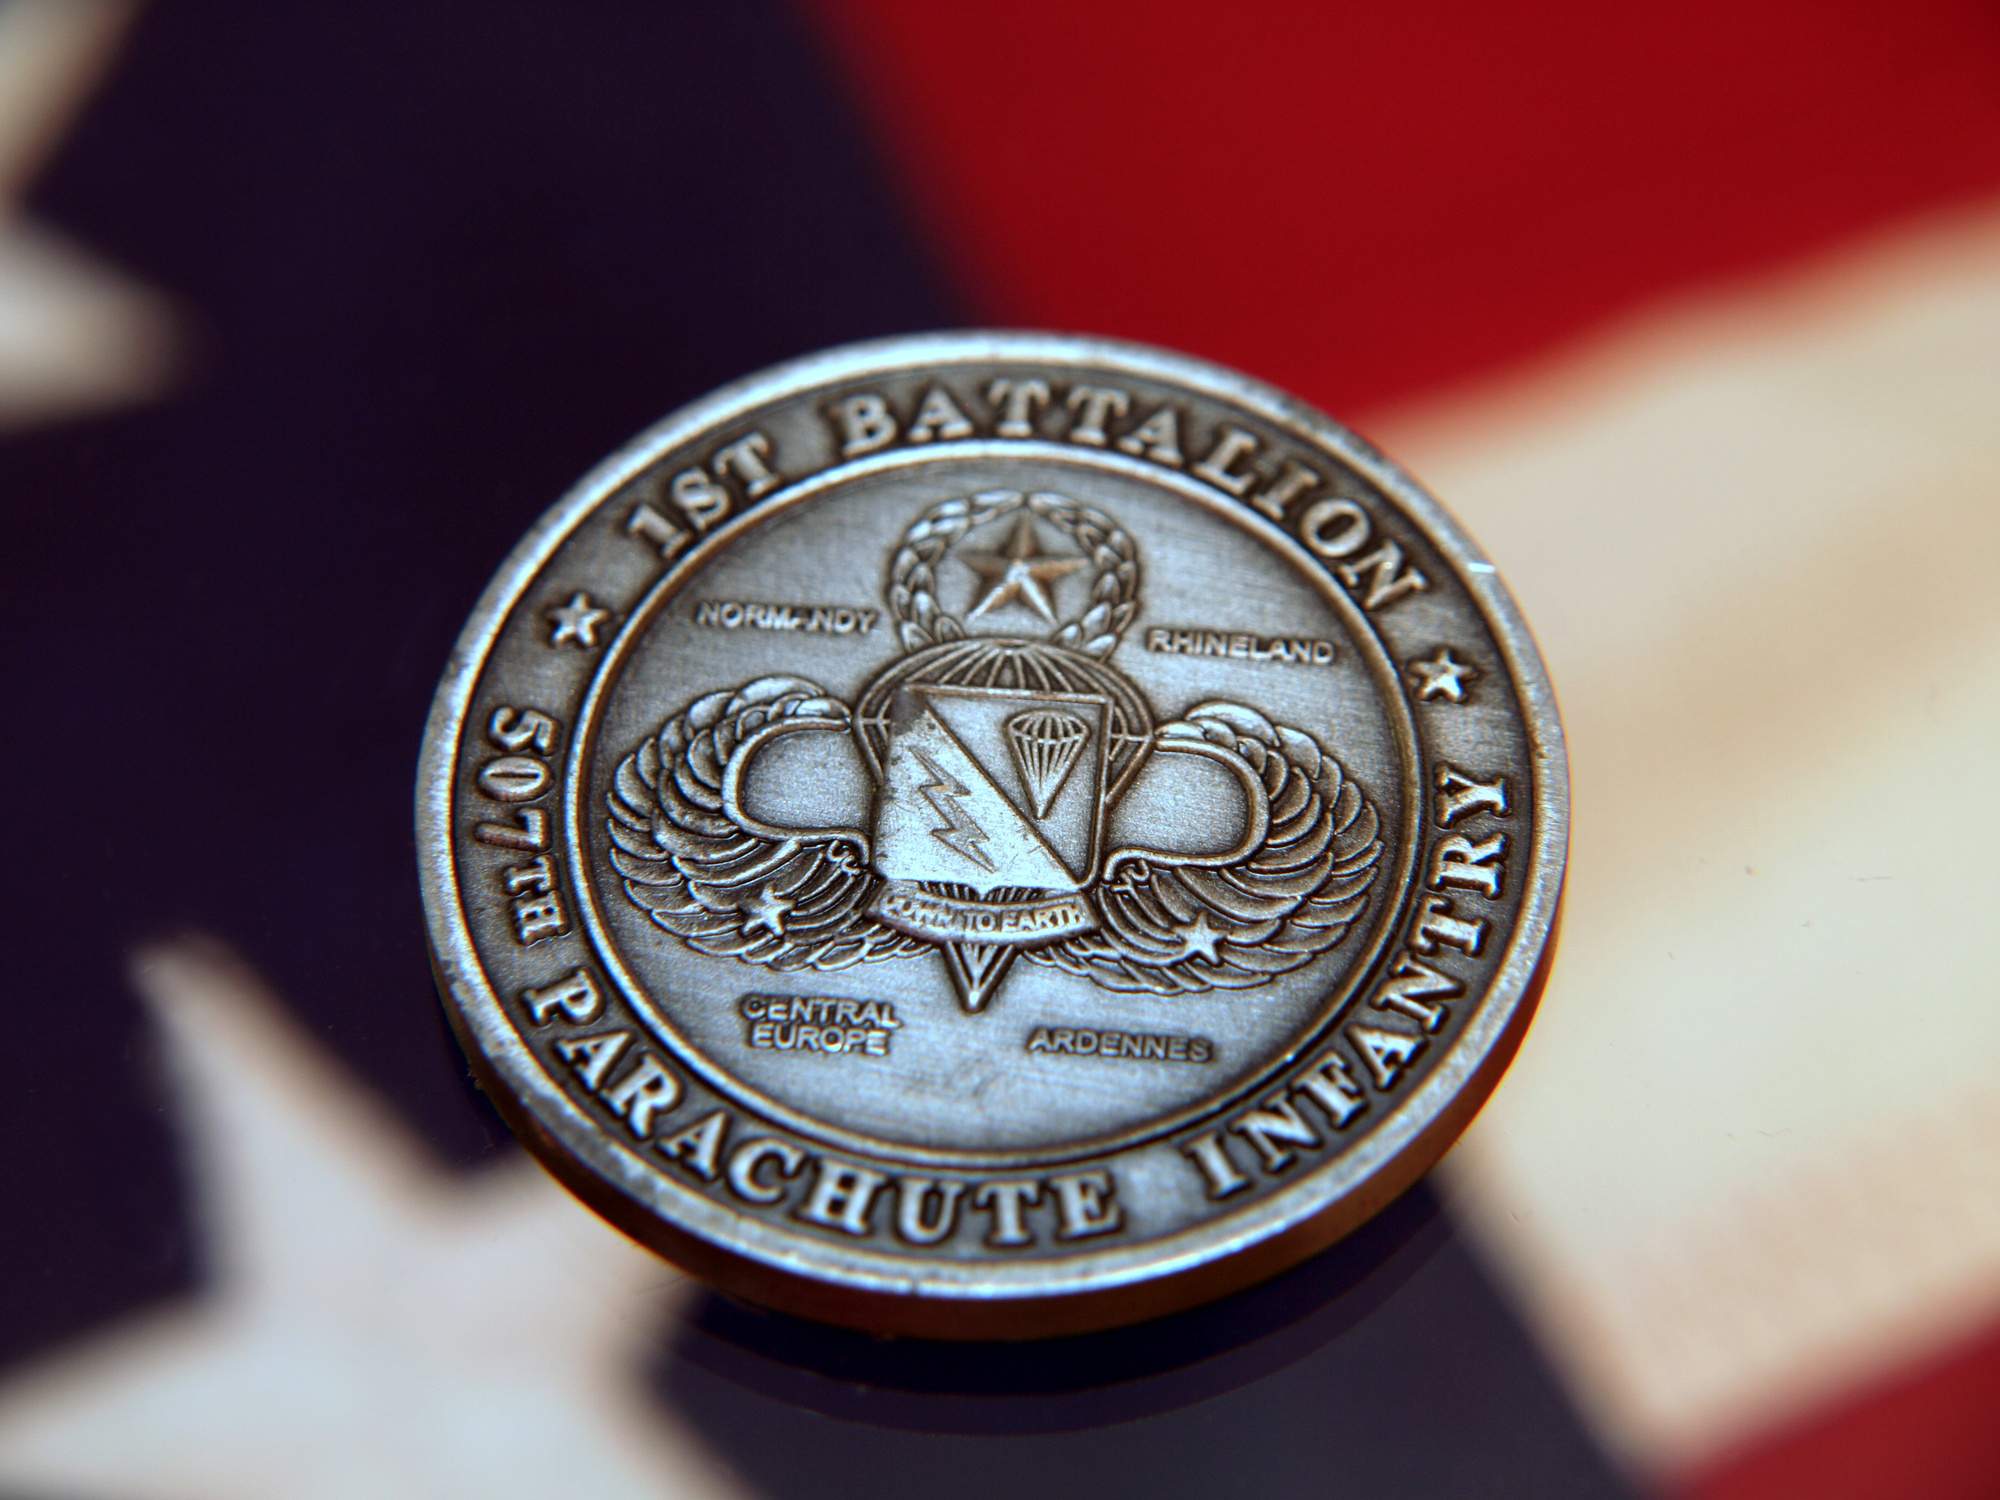 What You Should Know About Collecting a Challenge Coin From the Military